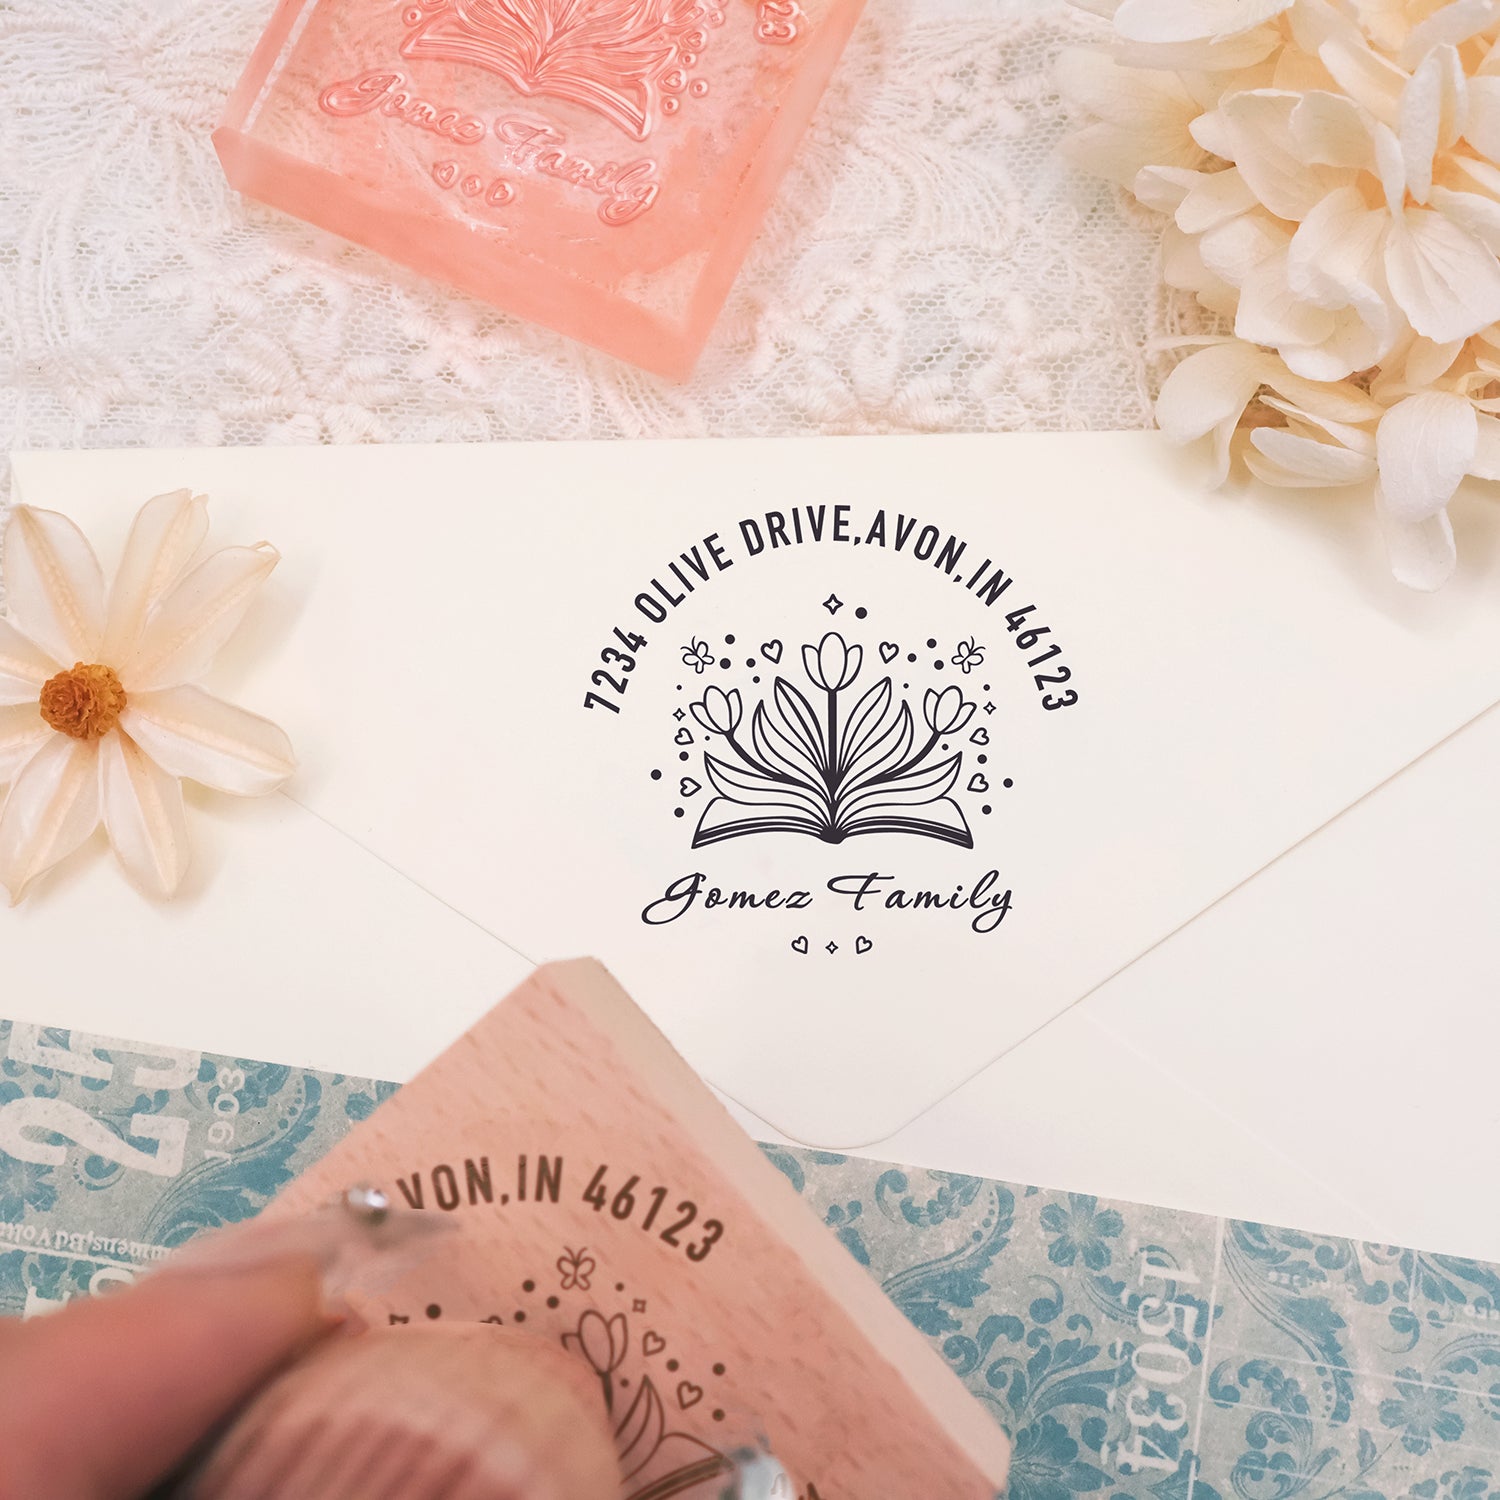 Custom Library Rubber Stamp (20 Designs)